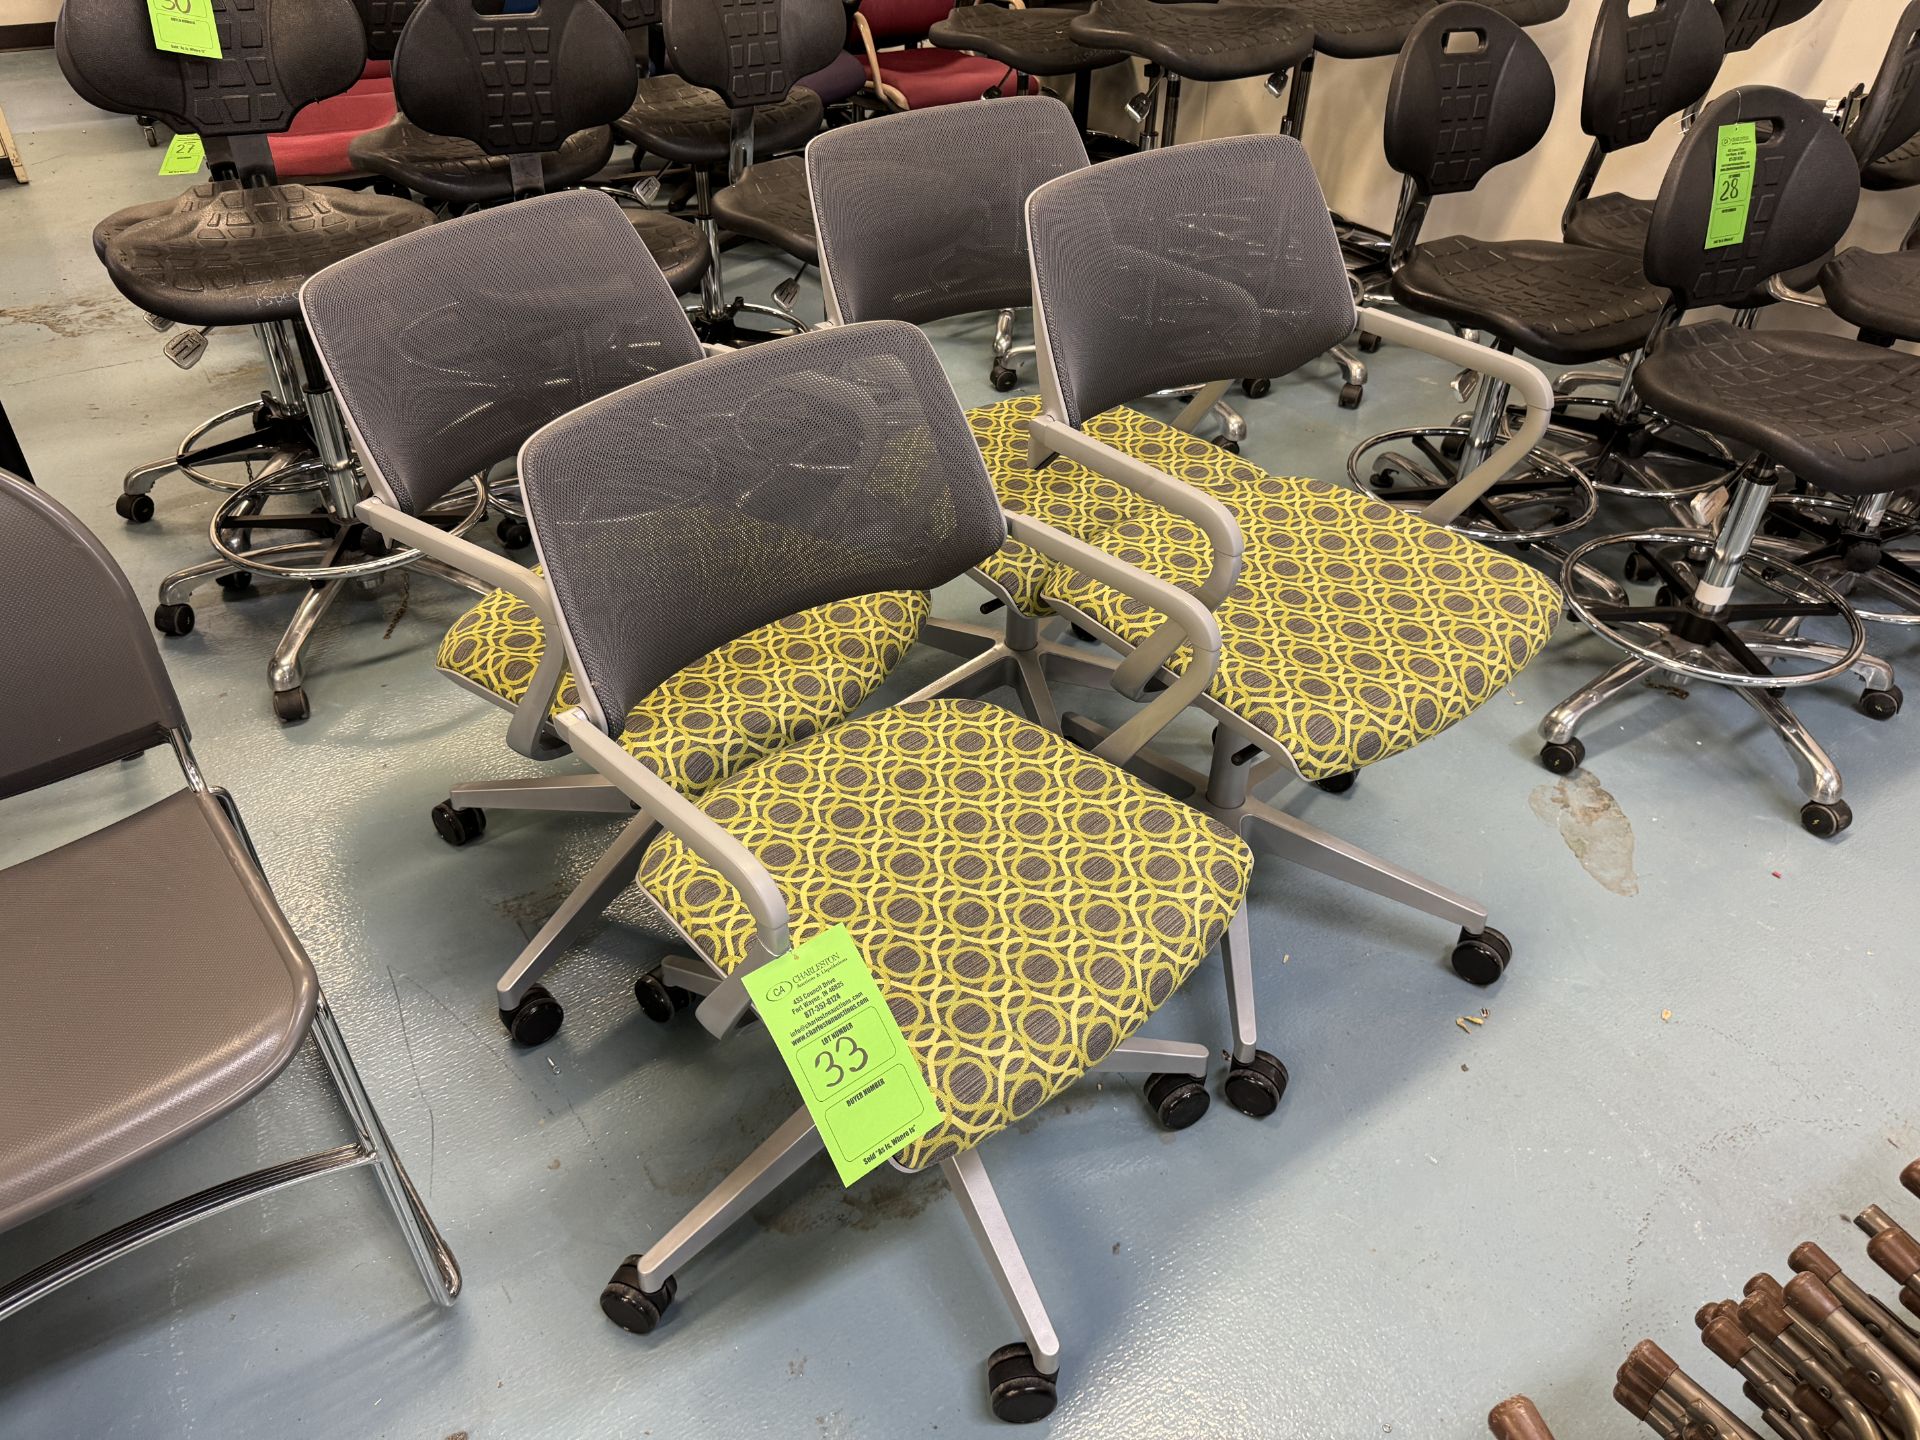 (4) STEELCASE OFFICE CHAIRS